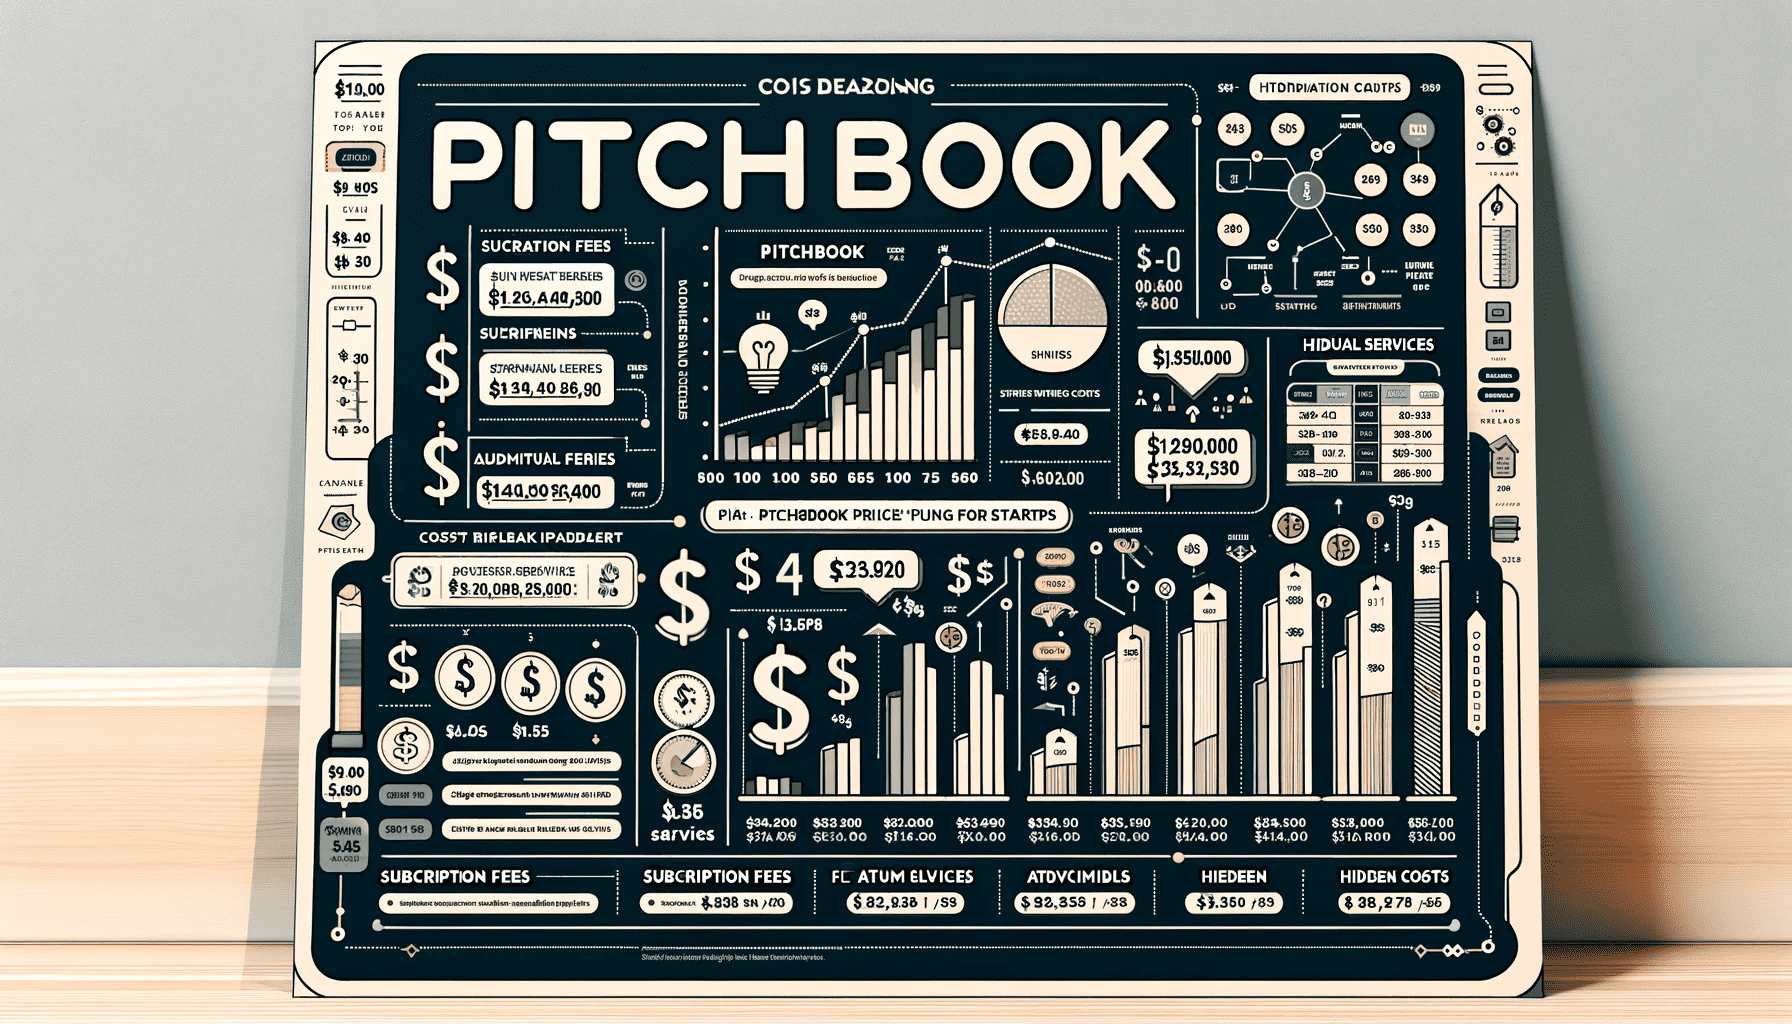 Pitchbook pricing for startups - Featured Image